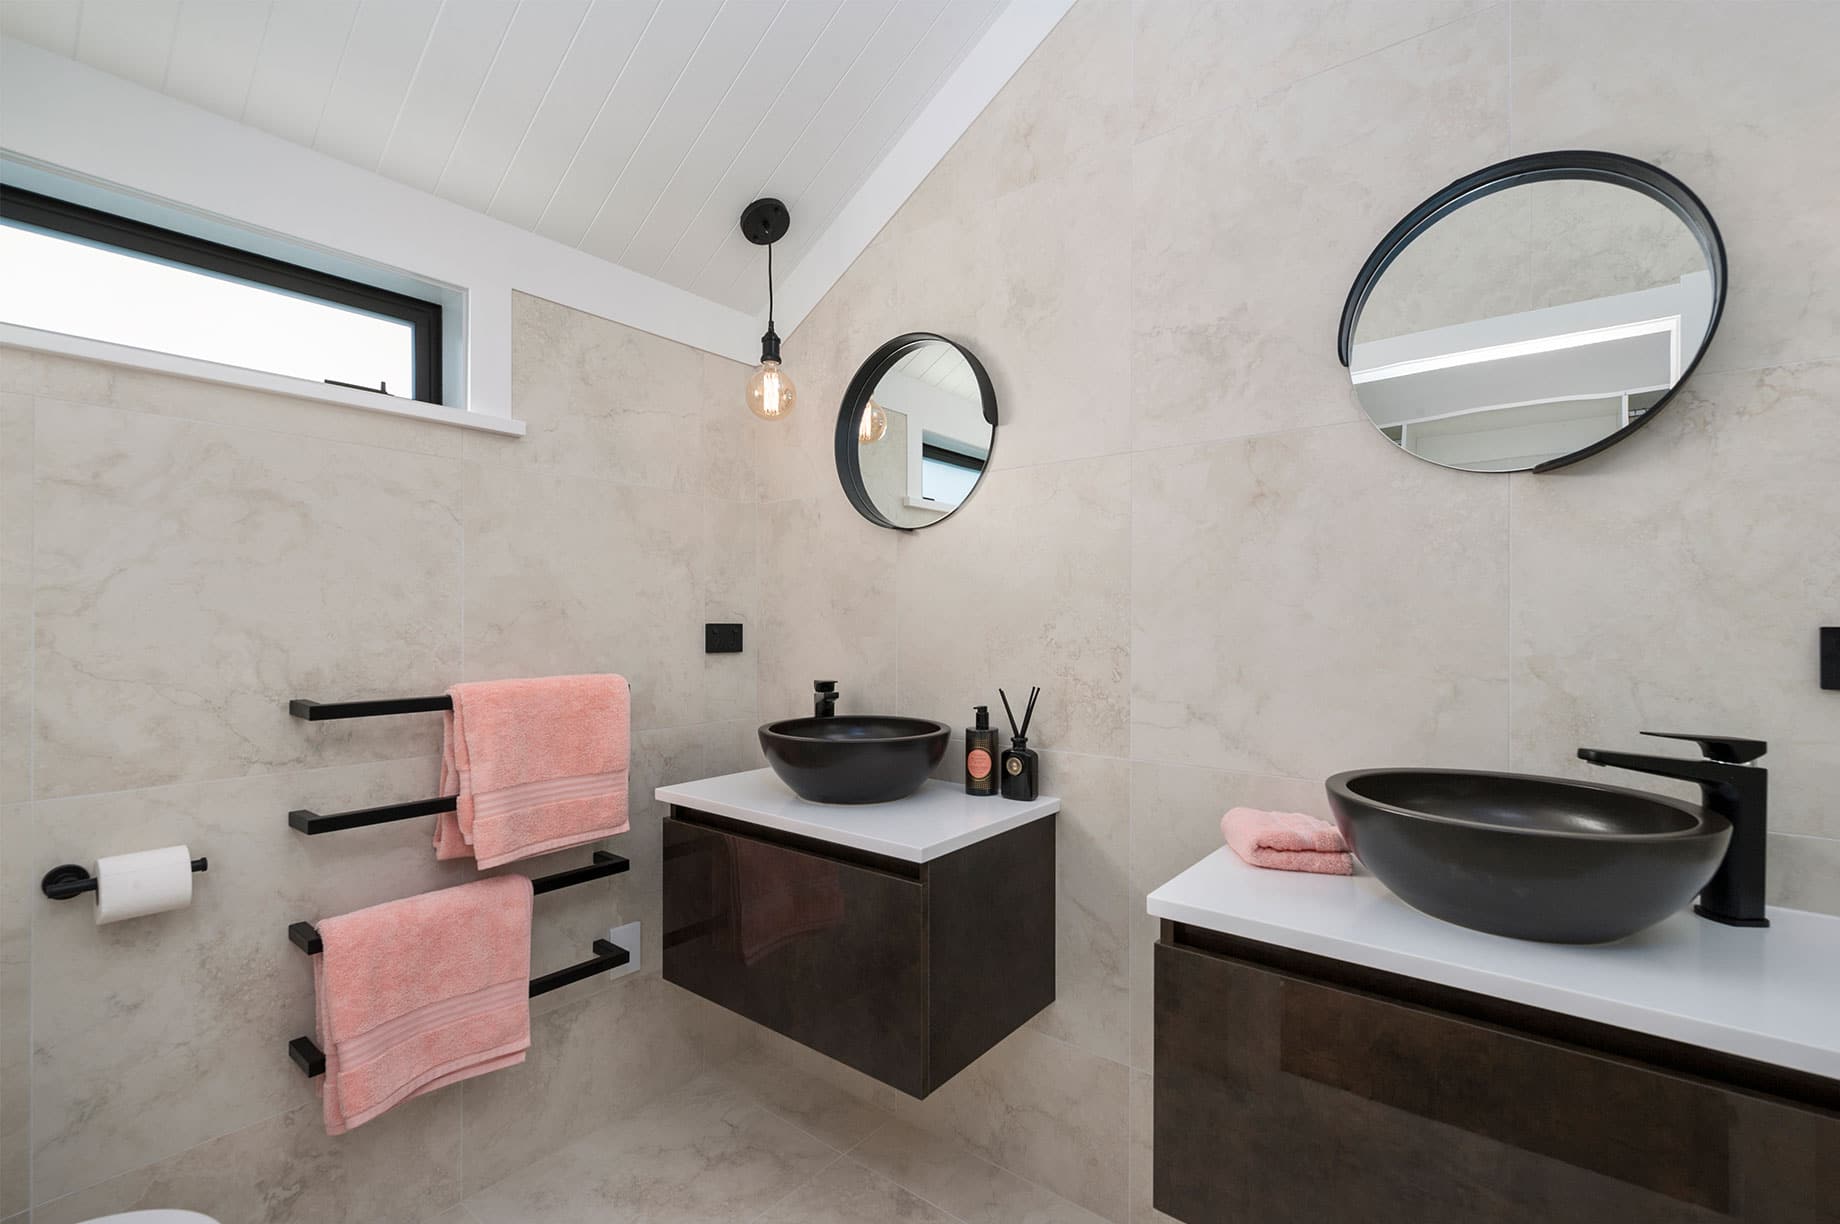 Bathroom with dual black basins and pink towels